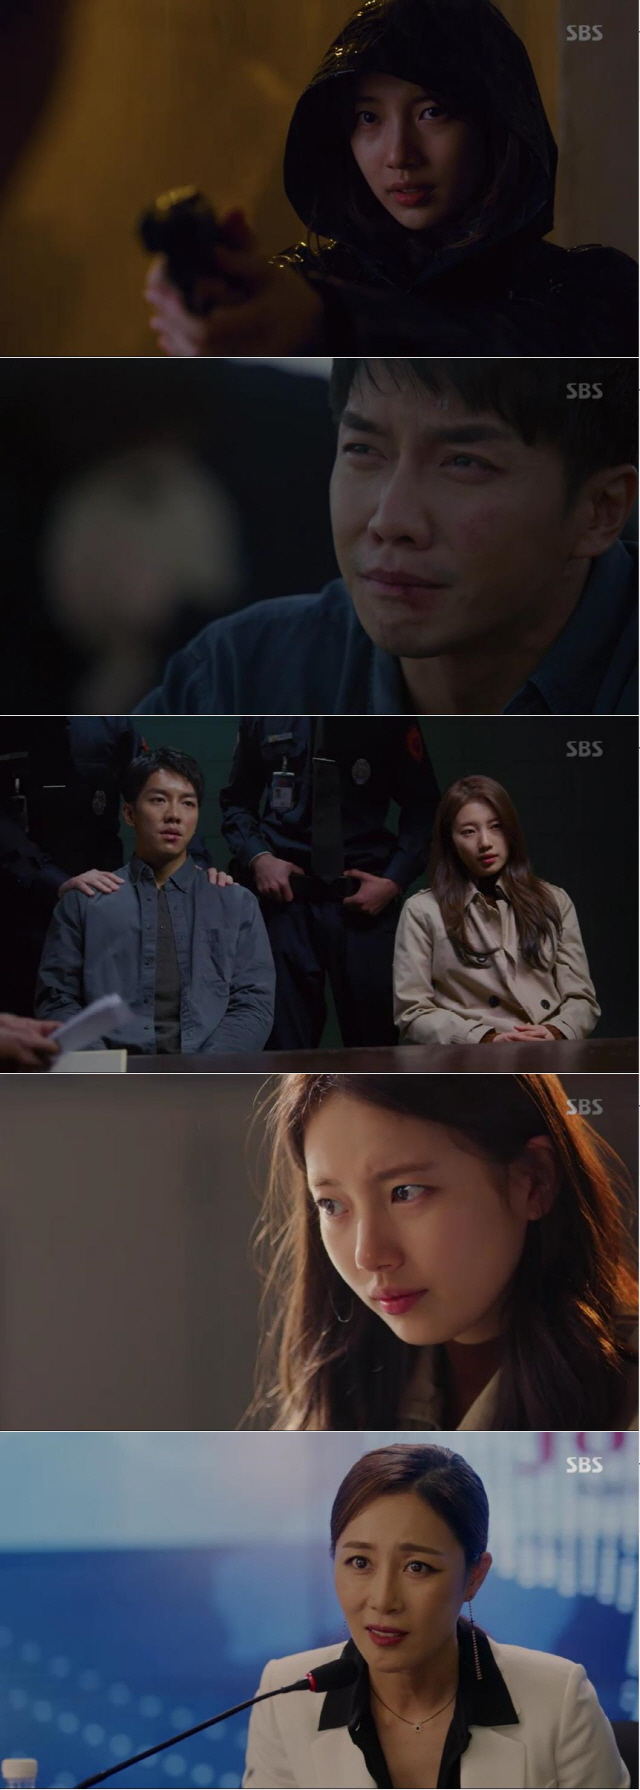 Its not an accident, its a terror, Im sure!In the SBS gilt drama Vagabond, Lee Seung-gi and Bae Suzy opened the Dawn of the Planet of the Appearance, intuition that the civil airliner Fall accident was the work of a terrorist.In the second episode of Vagabond broadcast on the 21st, Cha Dal-gun and Bae Suzy showed a gut feeling that there was a terrorist behind the fall accident of a civil-commodity passenger plane.Civilian stuntman Cha Dal-gun and NIS Black agent Goh Hae-ri wondered whether they would start full-scale cooperation with each other in order to find the truth hidden in the passenger plane Fall accident that caused many casualties.In the play, Cha Dal-geon missed Jerome (Yoo Tae-oh), who is suspected of being a suspect for a terror, in front of his eyes and was in a rage.At the same time, while the bereaved families met Edward Park, CEO of Dynamic Systems, a passenger plane manufacturer who was Falling to solve the compensation problem, Cha Dal-gun appeared and said, Planes is Fall, but there is a lively young man.They checked CCTV to find out if the man in SoundCloud and the man who met Chadalgun were the same person, but the man in the video was a person other than Jerome, and Chadalgun was stunned and shouted CCTV was manipulated, but no one, including Ko Hae-ri, believed Chadalgan.Chadalgan returned to the hotel, saved videos of SoundCloud on USB, and then stepped out to deliver them to the confessional.At this time, someone in a black raincoat sneaked in and tried to open a safe containing Chadalgans The Notebook.In the meantime, when he arrived at the Gohari accommodation, he tried to climb the drain when he did not respond, and found that the moment he pointed a gun at his back.Cha Dal-gun shot him, Are you with him? He quickly snatched the gun of the Gohari and reversed the charter, mistaking the Gohari for being one of the terrobum, pointing the gun at the forehead of the Gohari, and began to search the hostel.However, through the phone call of Min Jae-sik (Jung Man-sik), the director of the NISs 7th director, who was called at that time, he learned that Ko Hae-ri was an NIS agent.After a stormy confrontation ended, Chadalgan asked Gohari to remember the face of the terrobum by holding out a USB.Cha Dal-gun said, Are you responsible? He pushed the invitation to the embassy, and Ko Hae-ri, who looked at his name on it and made a heavy expression, eventually blushed at the appearance of the children laughing in the USB and the sunny smile.Then, when Hoon found Jerome on the phone from behind, he immediately asked Gong Hwa-sook (Hwang Bo-ra) to check the contents of the mans call, and also told Kang Ju-cheol (Lee Ki-young), director of psychological information, I want to see the black box of the accident Planes.When the families gathered at the airport to return to Korea, Cha Dal-geon was surprised to learn that all of the data in SoundCloud had been erased.The car was hurried to the room, and at this time the cleaner in front of the room rushed to the cleaning box and disappeared.Cha Dal-geon found a helmet-wearing man rushing away with his The Notebook and flew out of the window to catch him, but he finally missed it.At the moment, Cha Dal-geon recalled the existence of the cleaner who had encountered him, and went to the road and fought violently and was angry, Who is the terrorist?However, in the end, Chadalgan was handcuffed by the police who received the report and was taken away.Gohari, who was watching the video, found out that the man speaks Spanish, and Kim Ho-sik (Yoon Na-mu) told Gohari that Cha Dal-gun was trapped in a police station detention center.In the Moroccan Police Department, Gohari and Kim Ho-sik were looking at the scene, and the cleaning department was conducting a cross-examination of the car and the cleaner, and the cleaner insisted that the room was in a mess and only came out to report to the front desk.Police eventually released the cleaner without charges, and the car was excited and was trapped in the detention center.At this time, Gohari, who visited the ICAO analysis room according to Kang Ju-cheols advice, was surprised to learn that the bookkeeper Kim Song Yuqi (Jang Hyuk-jin) was talking to someone in Spanish, and that the conversation between the males conversation in SoundCloud and Kim Song Yuqi was being cross-analyzed and exquisite conversations were being held.The gunman was right, said Gohari, and the B357 Planes seem to have been terrified. He predicted that he was caught in a vortex of upheaval in a huge conspiracy.